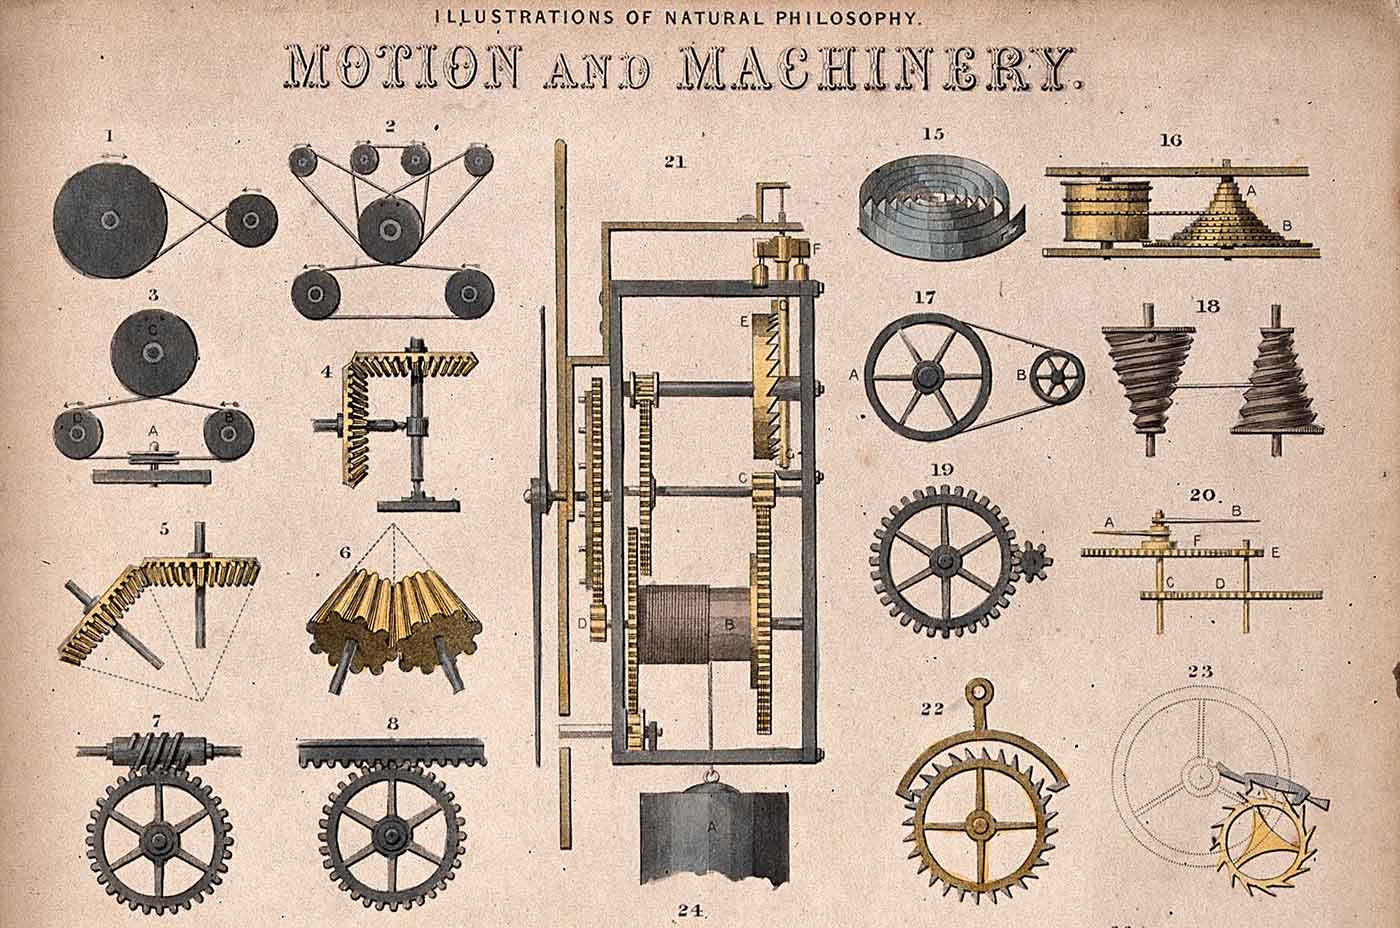 Mechanics: forces, gears, axles and dynamics, pulleys.